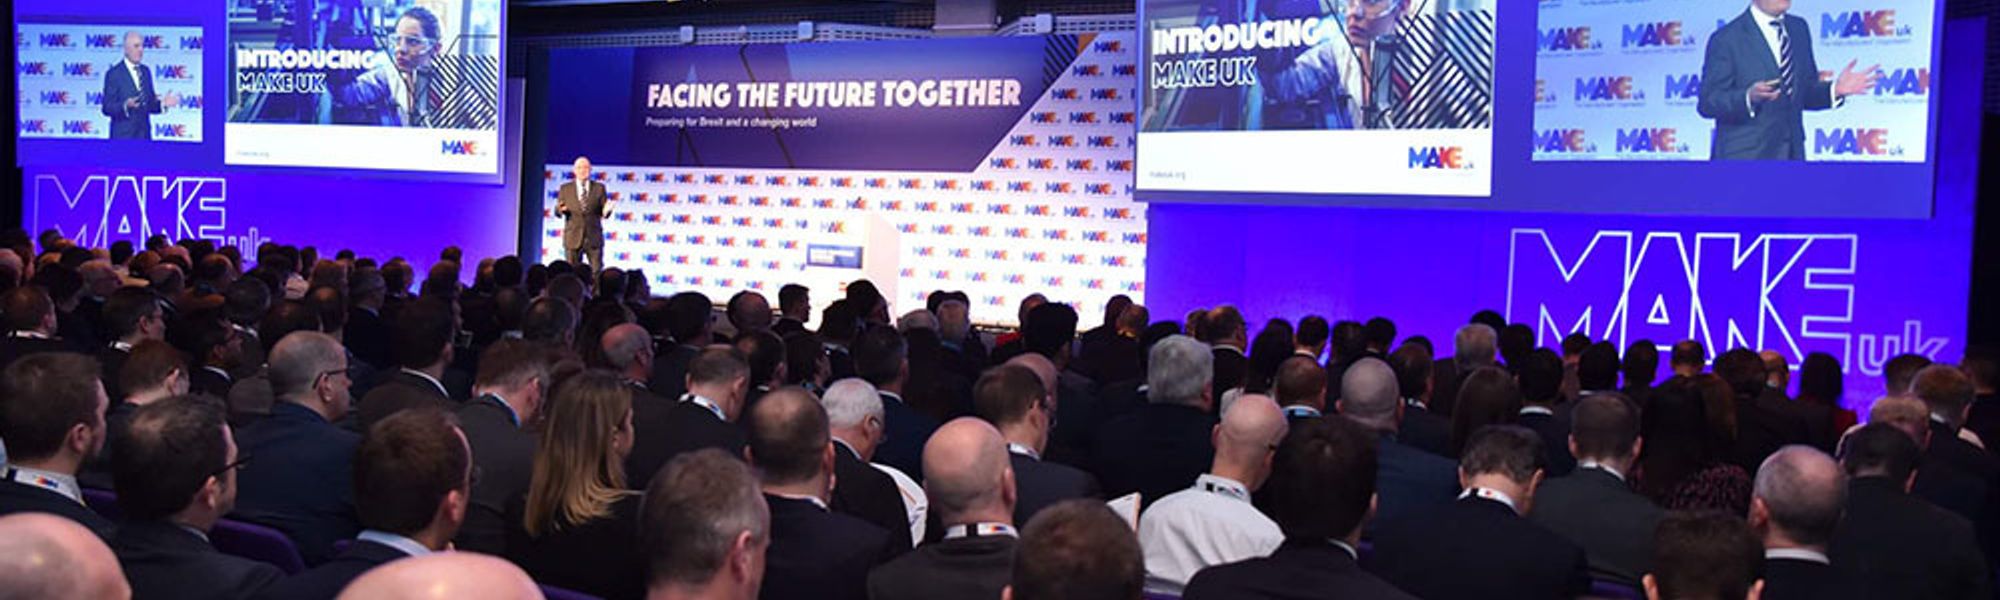 Facing The 21st Century Recruitment And Skills Make Uk Manufacturing Conference